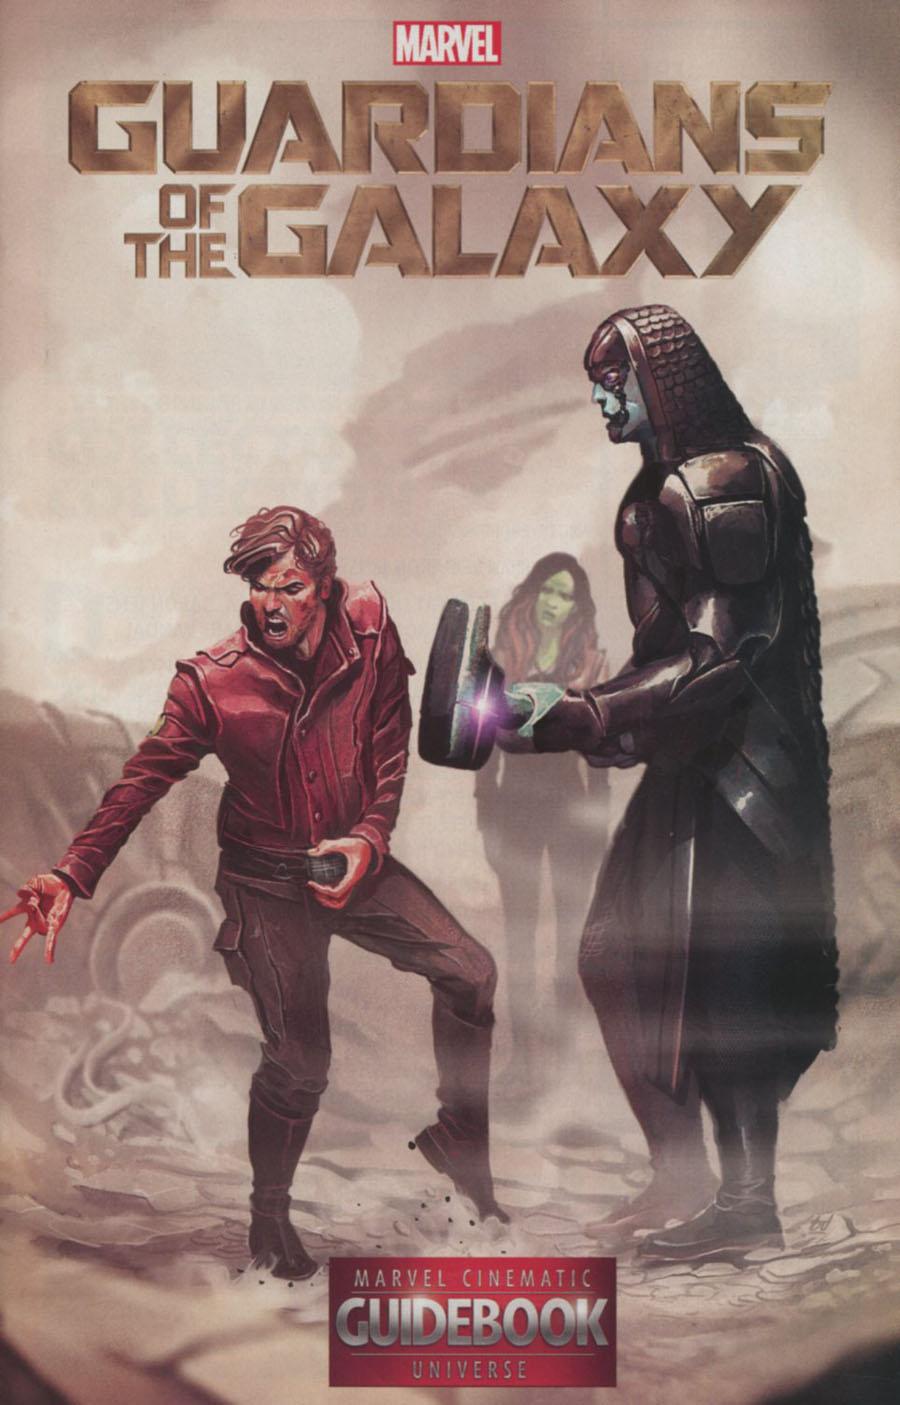 Guidebook To The Marvel Cinematic Universe Marvels Guardians Of The Galaxy Vol. 1 #1